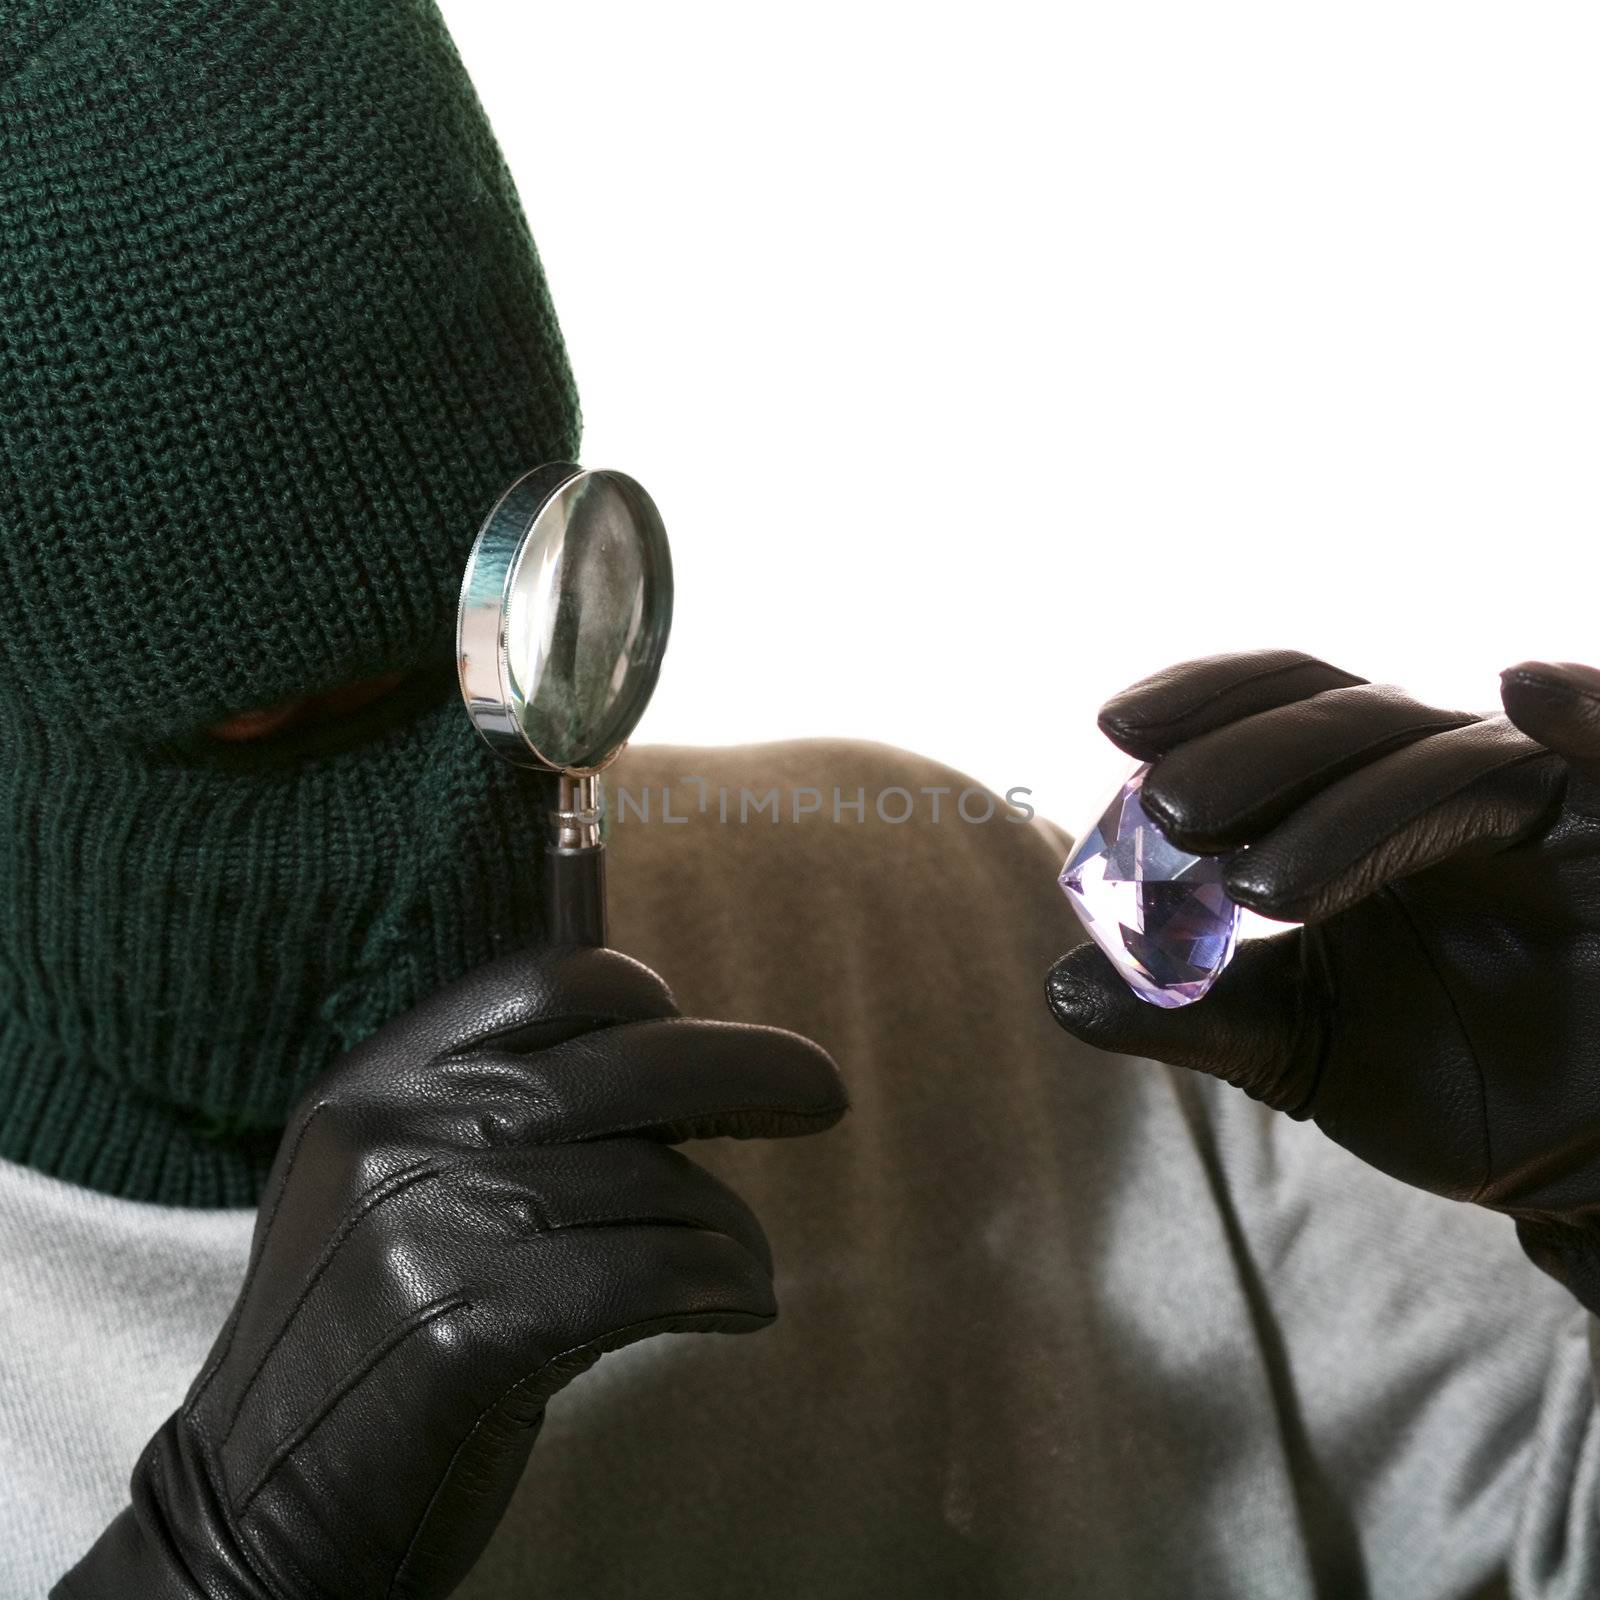 Thief with magnifier and jewel by velkol